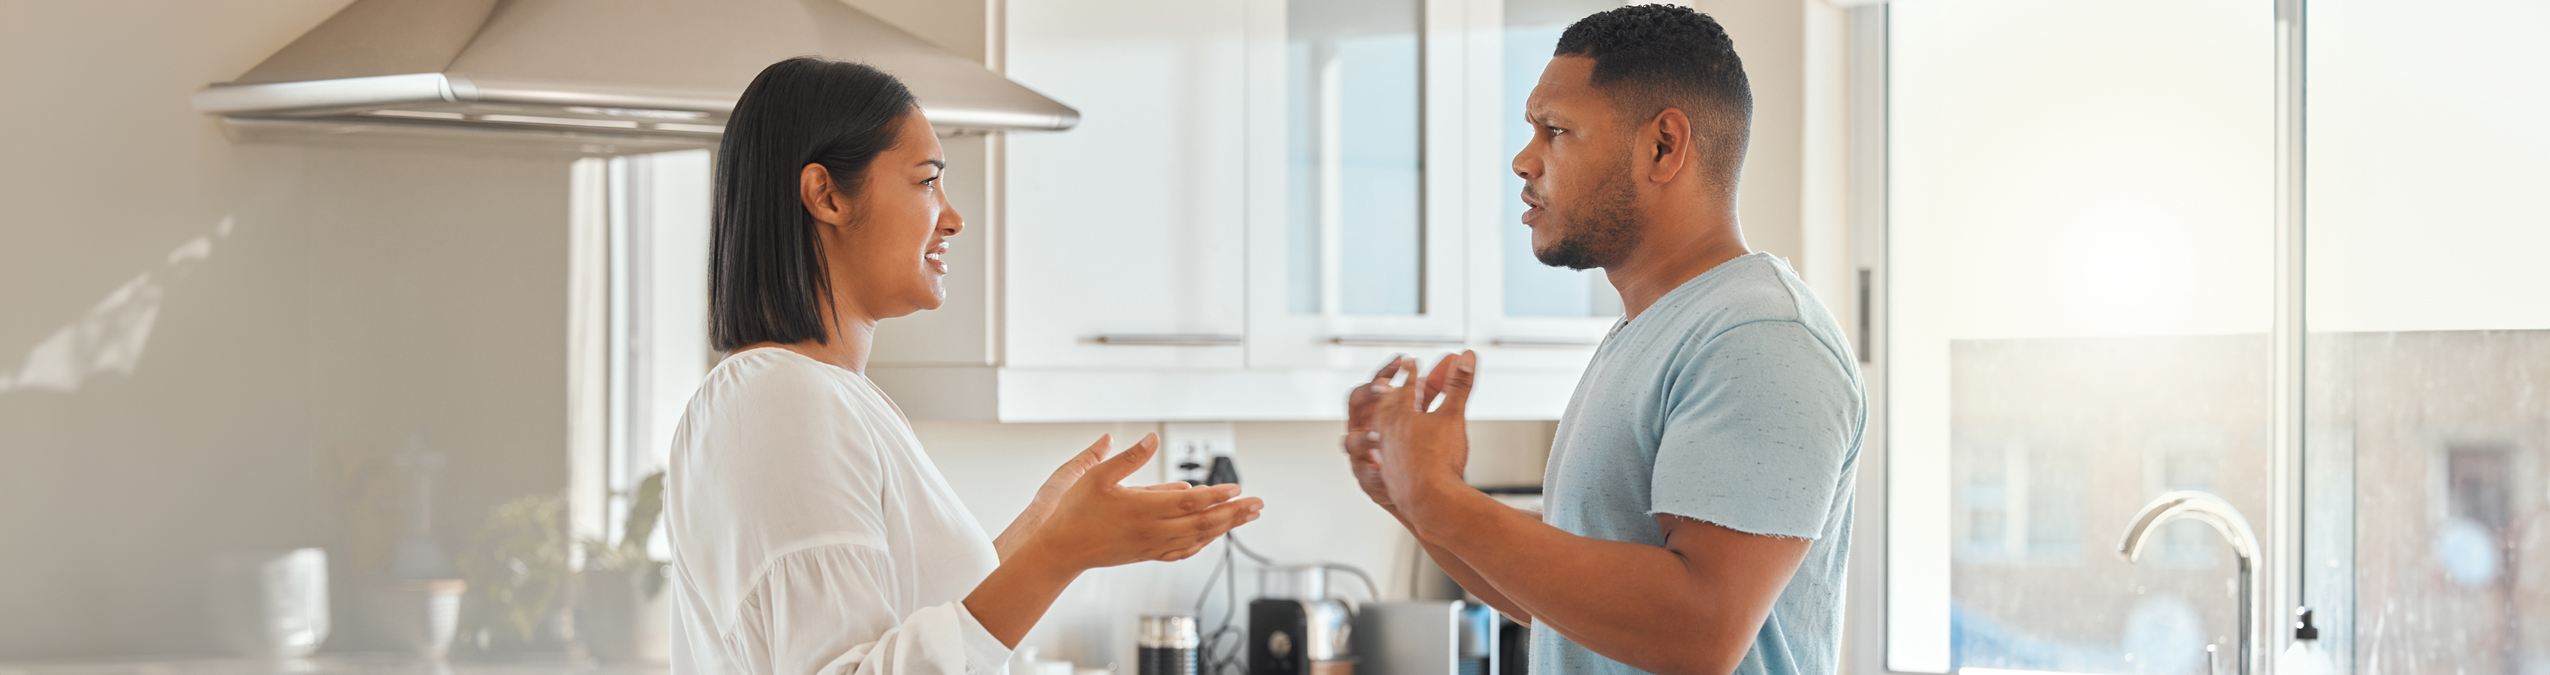 Two people arguing in a kitchen